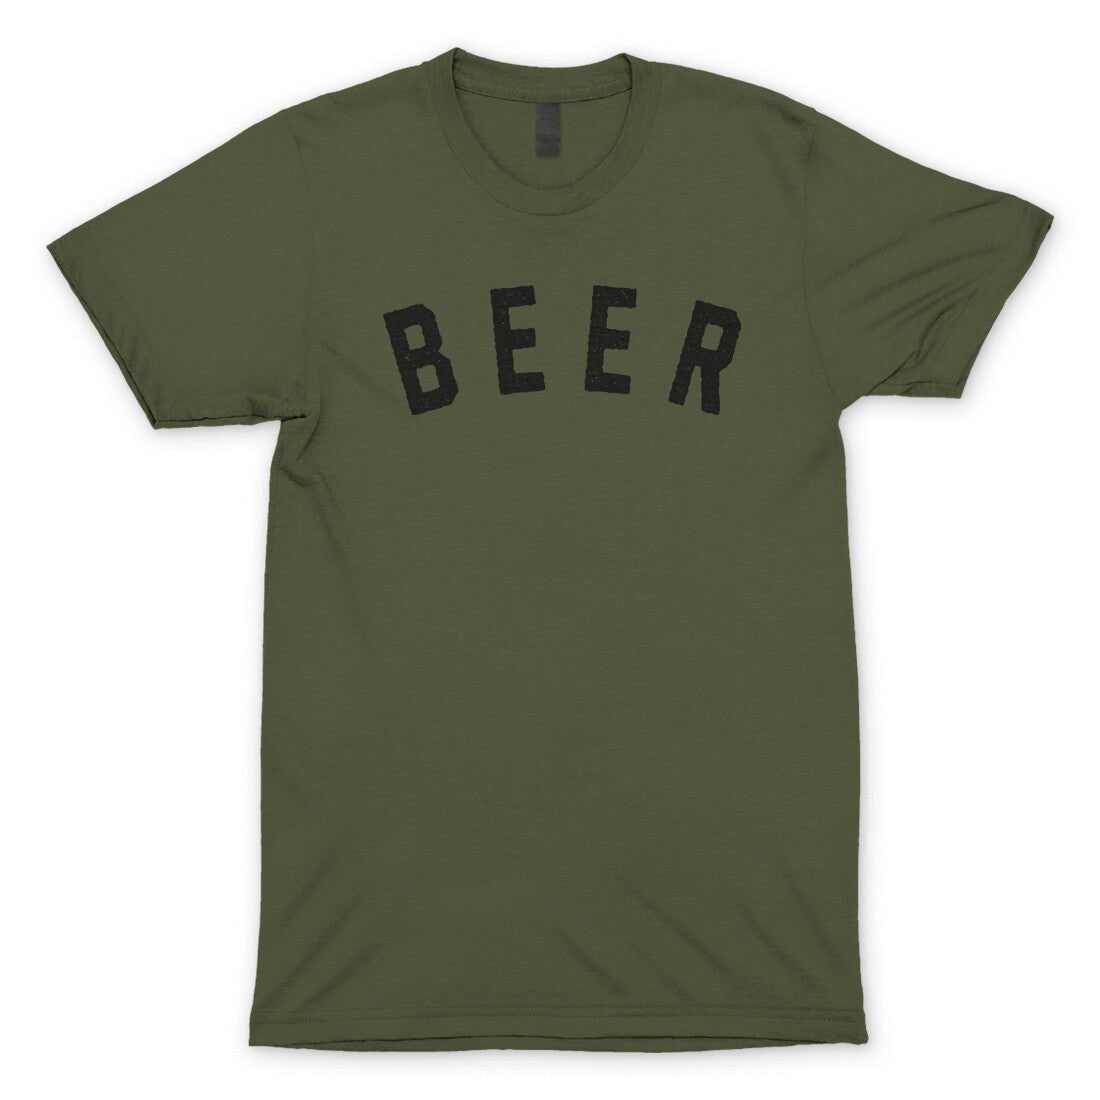 Beer in Military Green Color